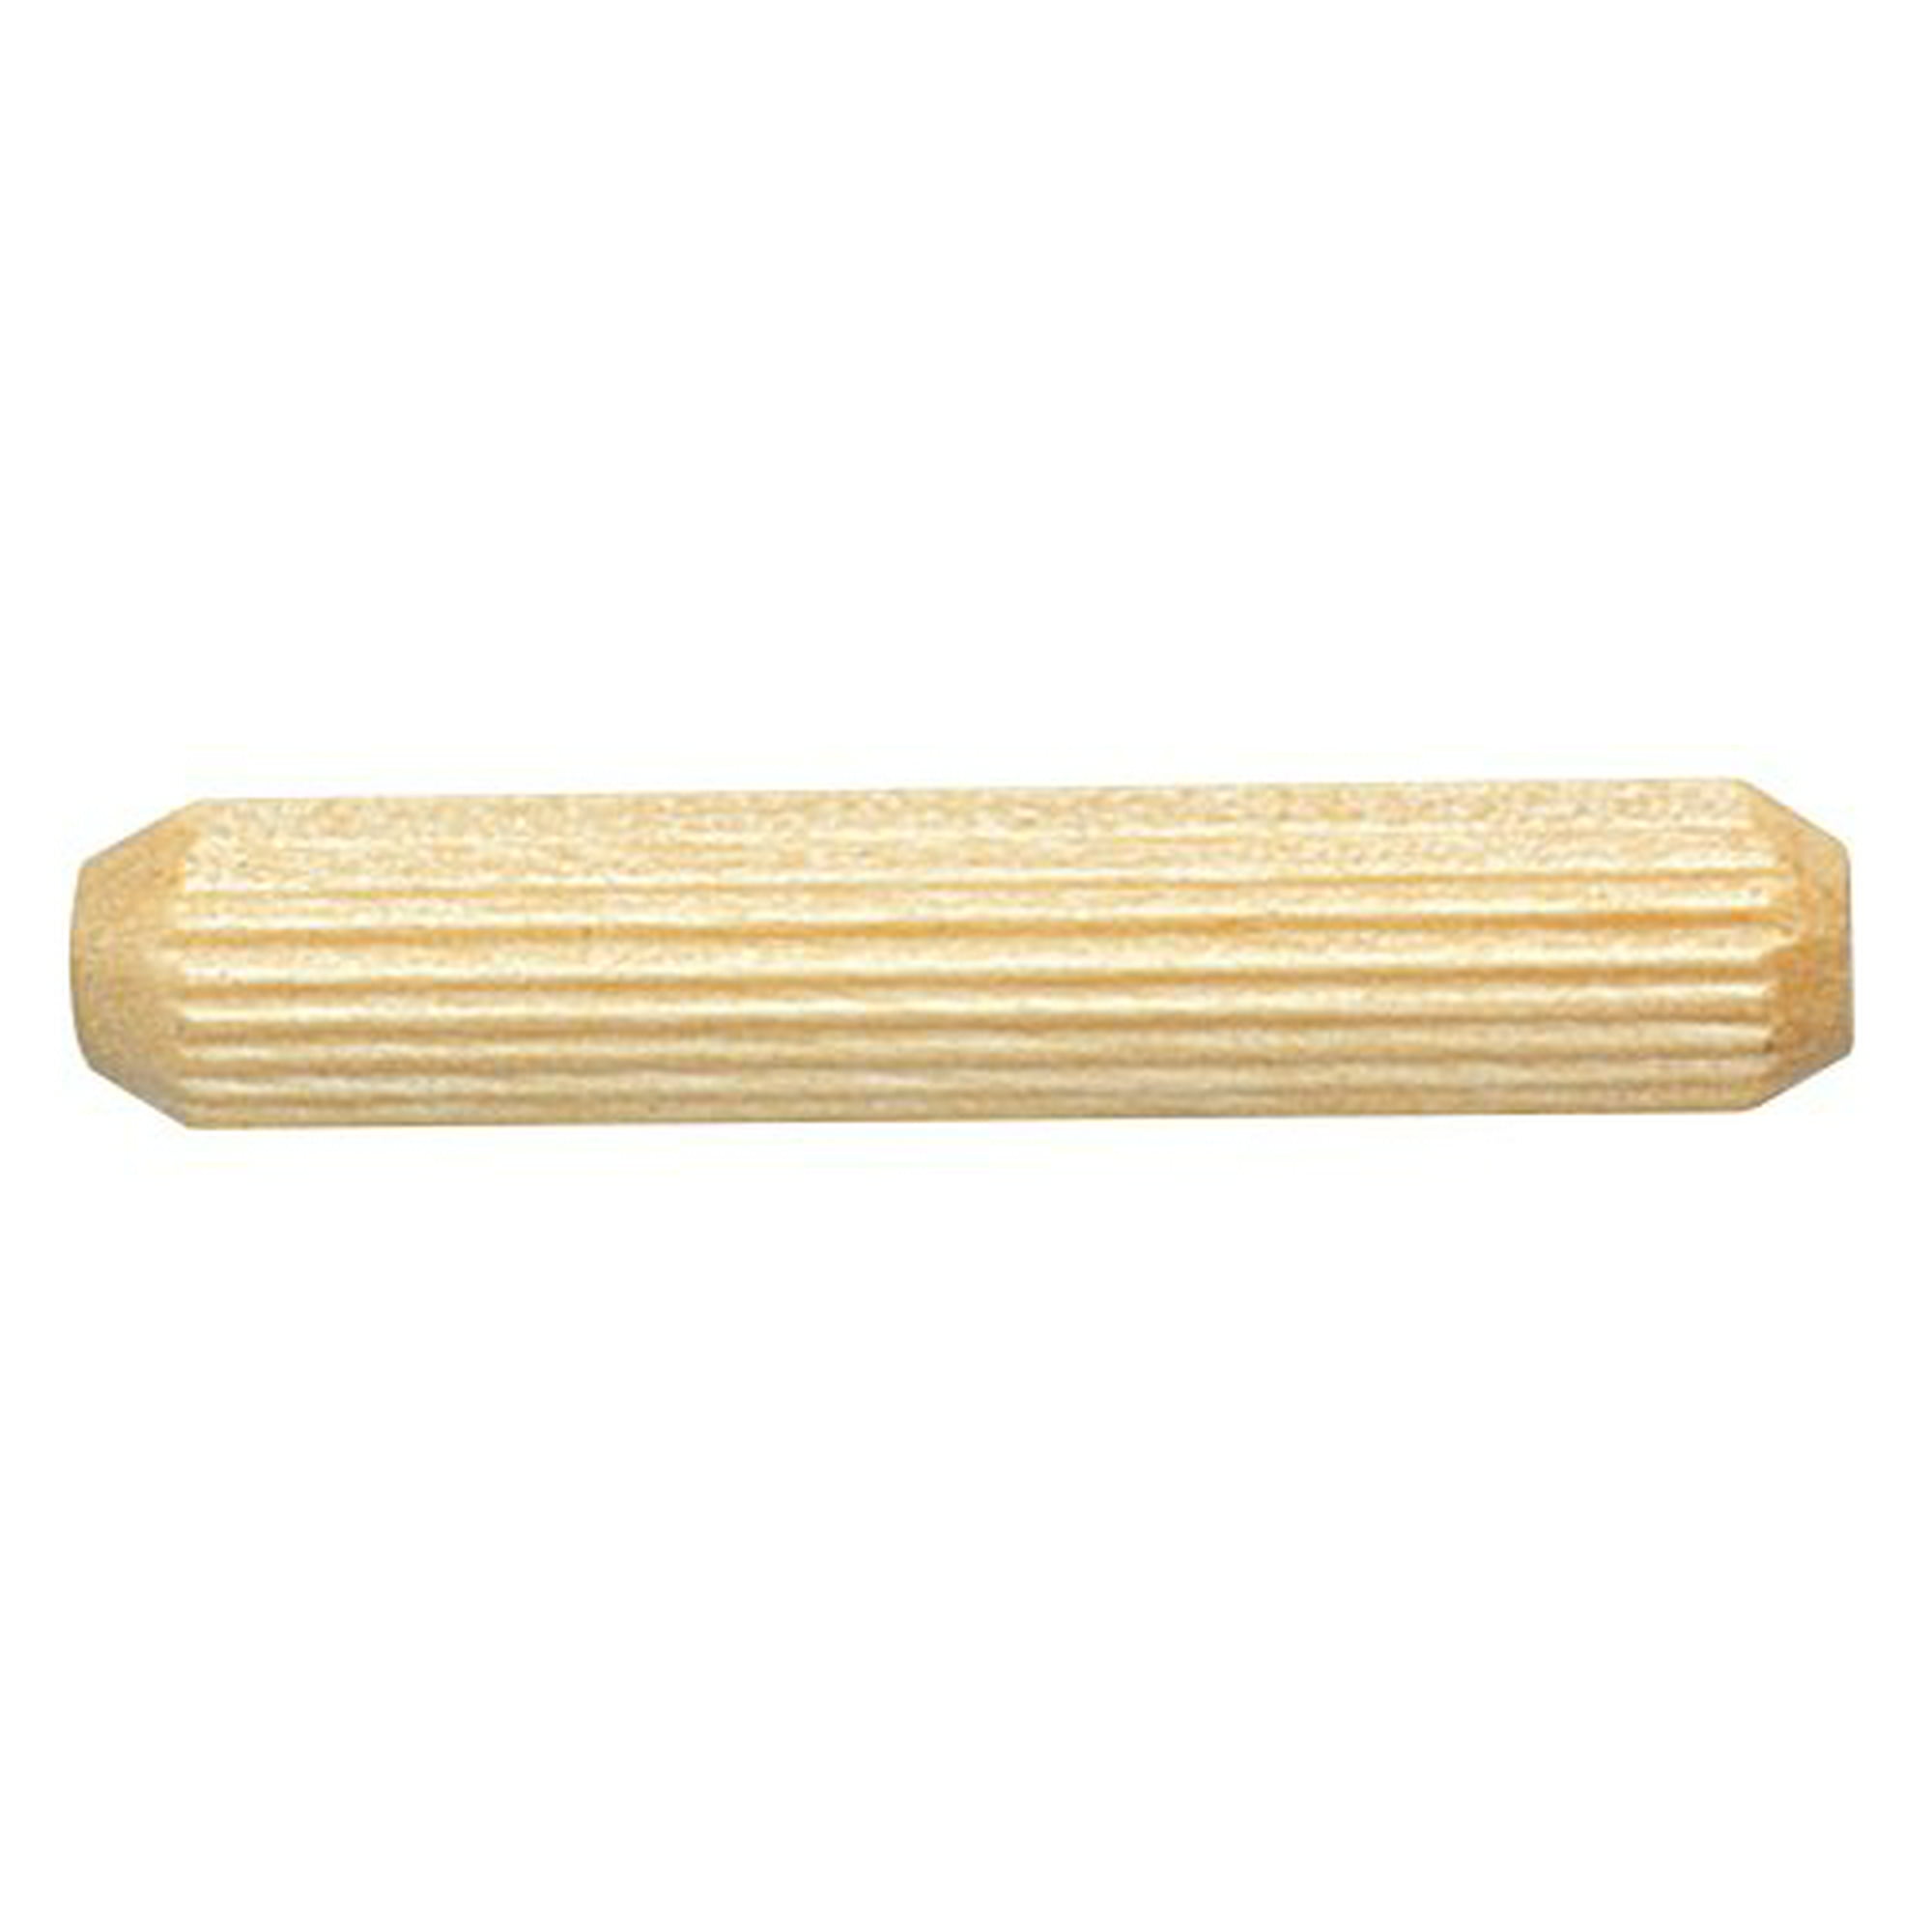 3/8 X 2 Multi-Groove Fluted Dowel Pin Wood Specialties Pins & Plugs 100-pack Platte River 801101 